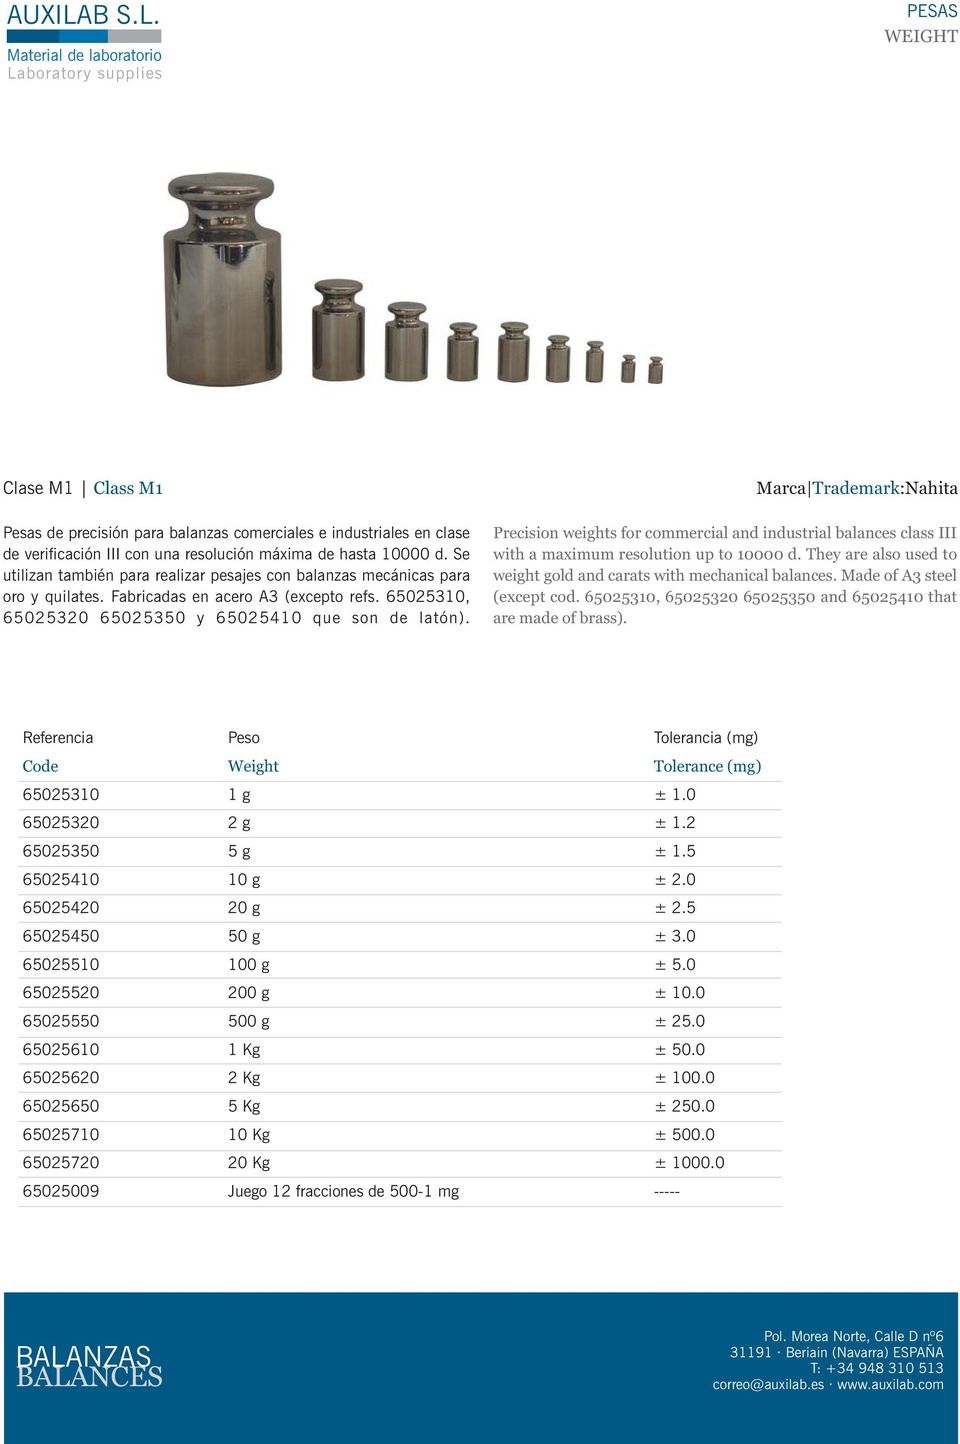 Precision weights for commercial and industrial balances class III with a maximum resolution up to 10000 d. They are also used to weight gold and carats with mechanical balances.